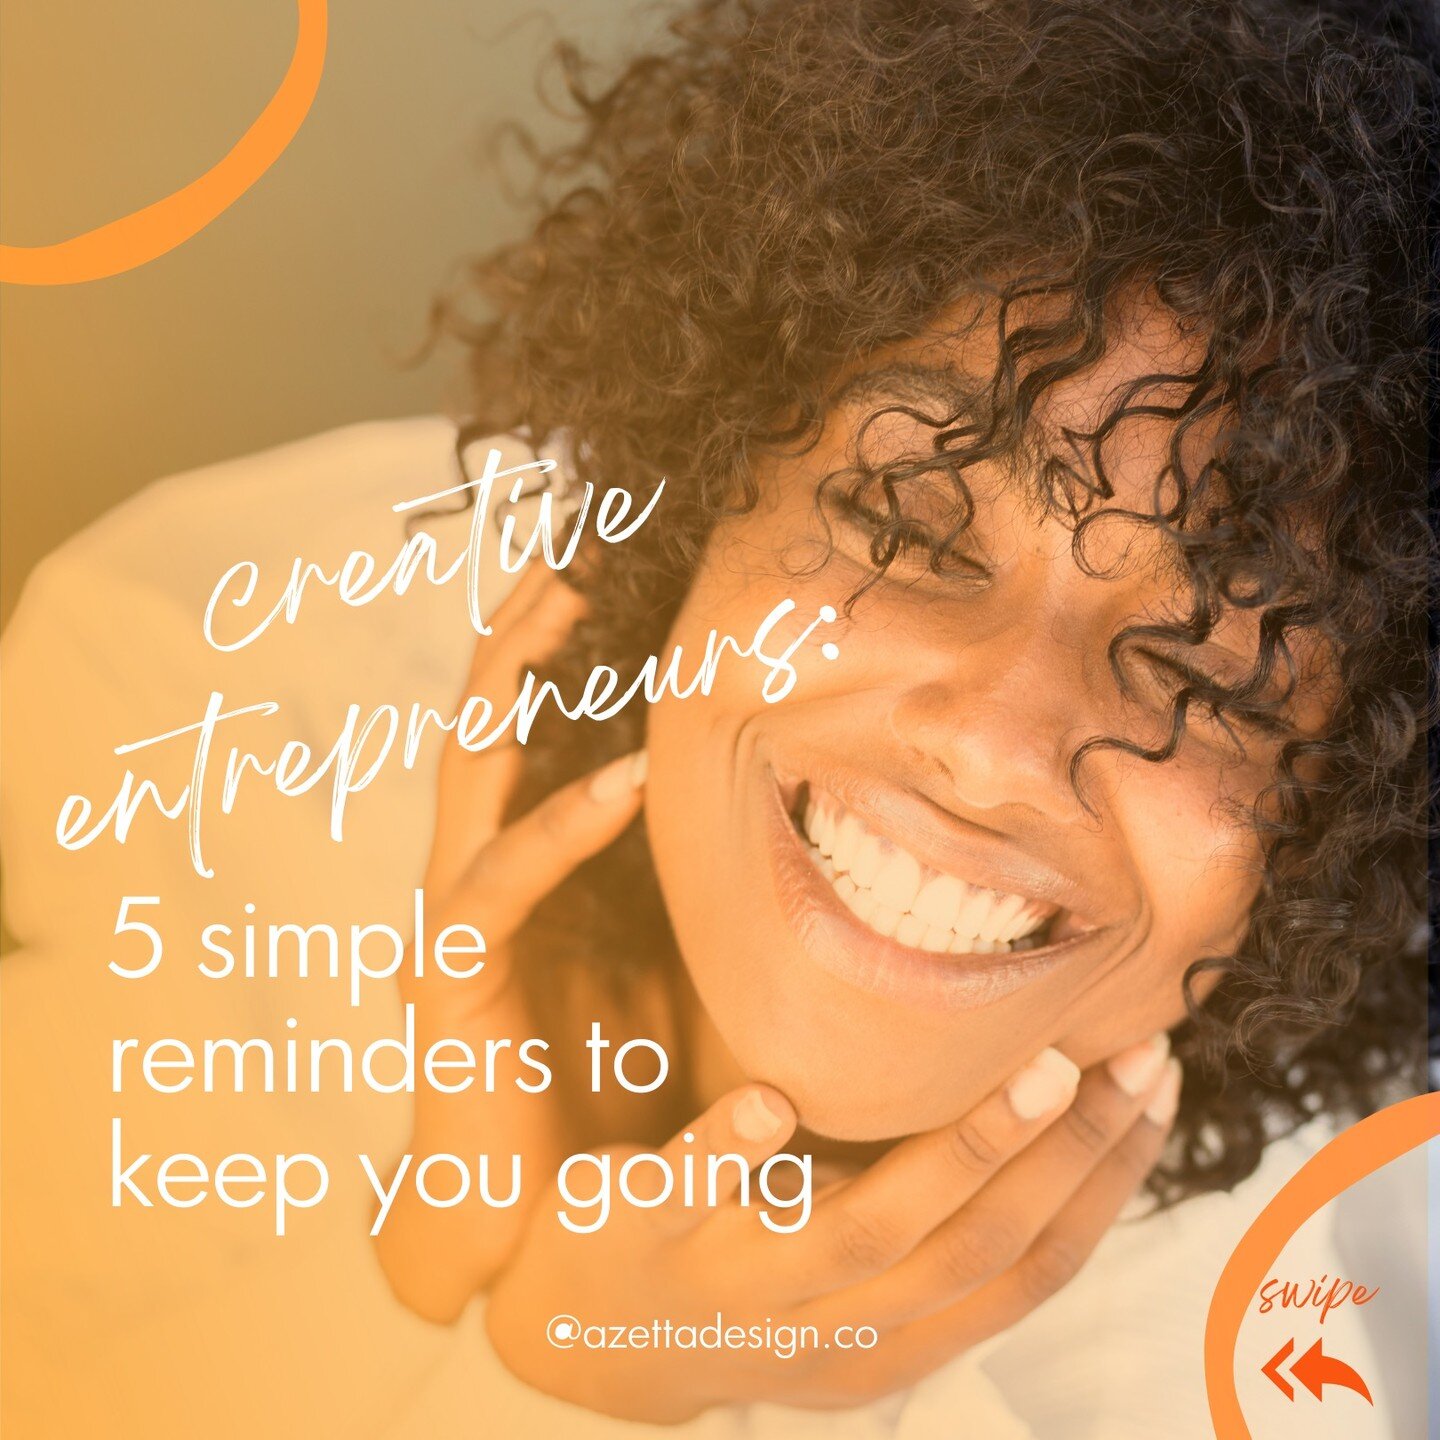 Hello creatives! Sometimes we all need a reminder of our greatness.
 
✨Here 5 Simple reminders to keep you going through the summer and beyond:
- Always be YOU
- Dream BIG and go after it
- You are enough
- Go at your own pace and time
- Say NO more 